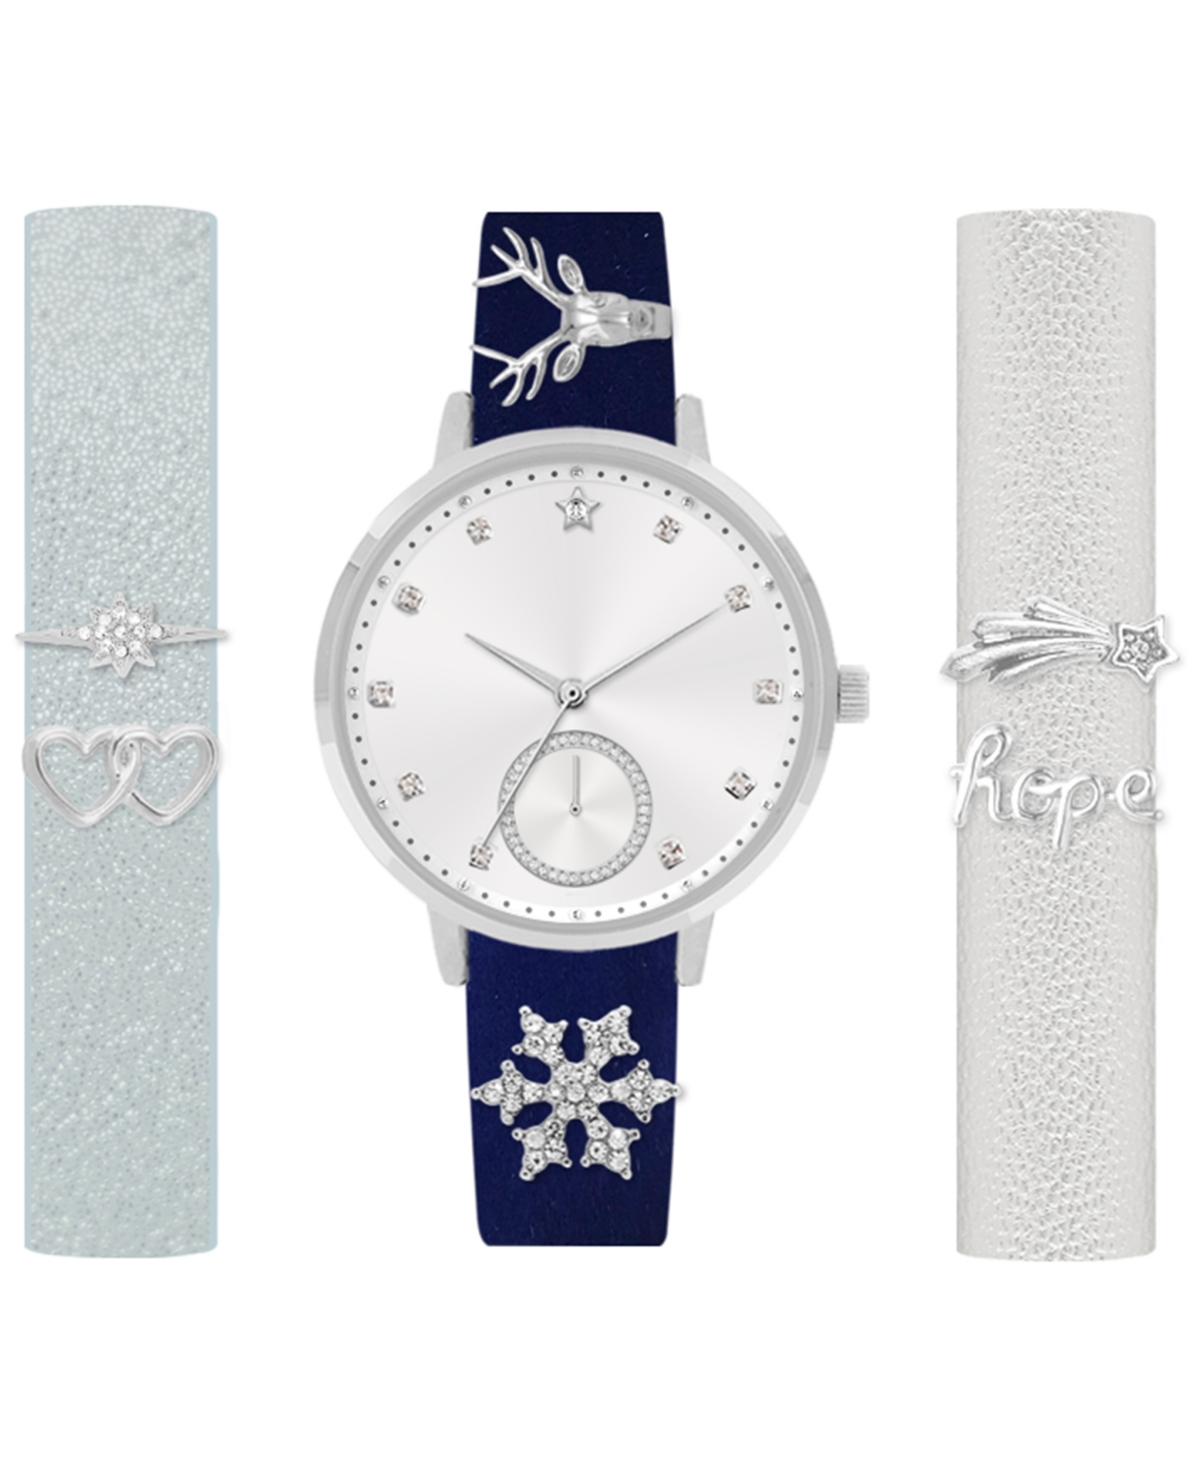 Jessica Carlyle Women's Interchangeable Strap & Charm Watch 34mm, Gift Set